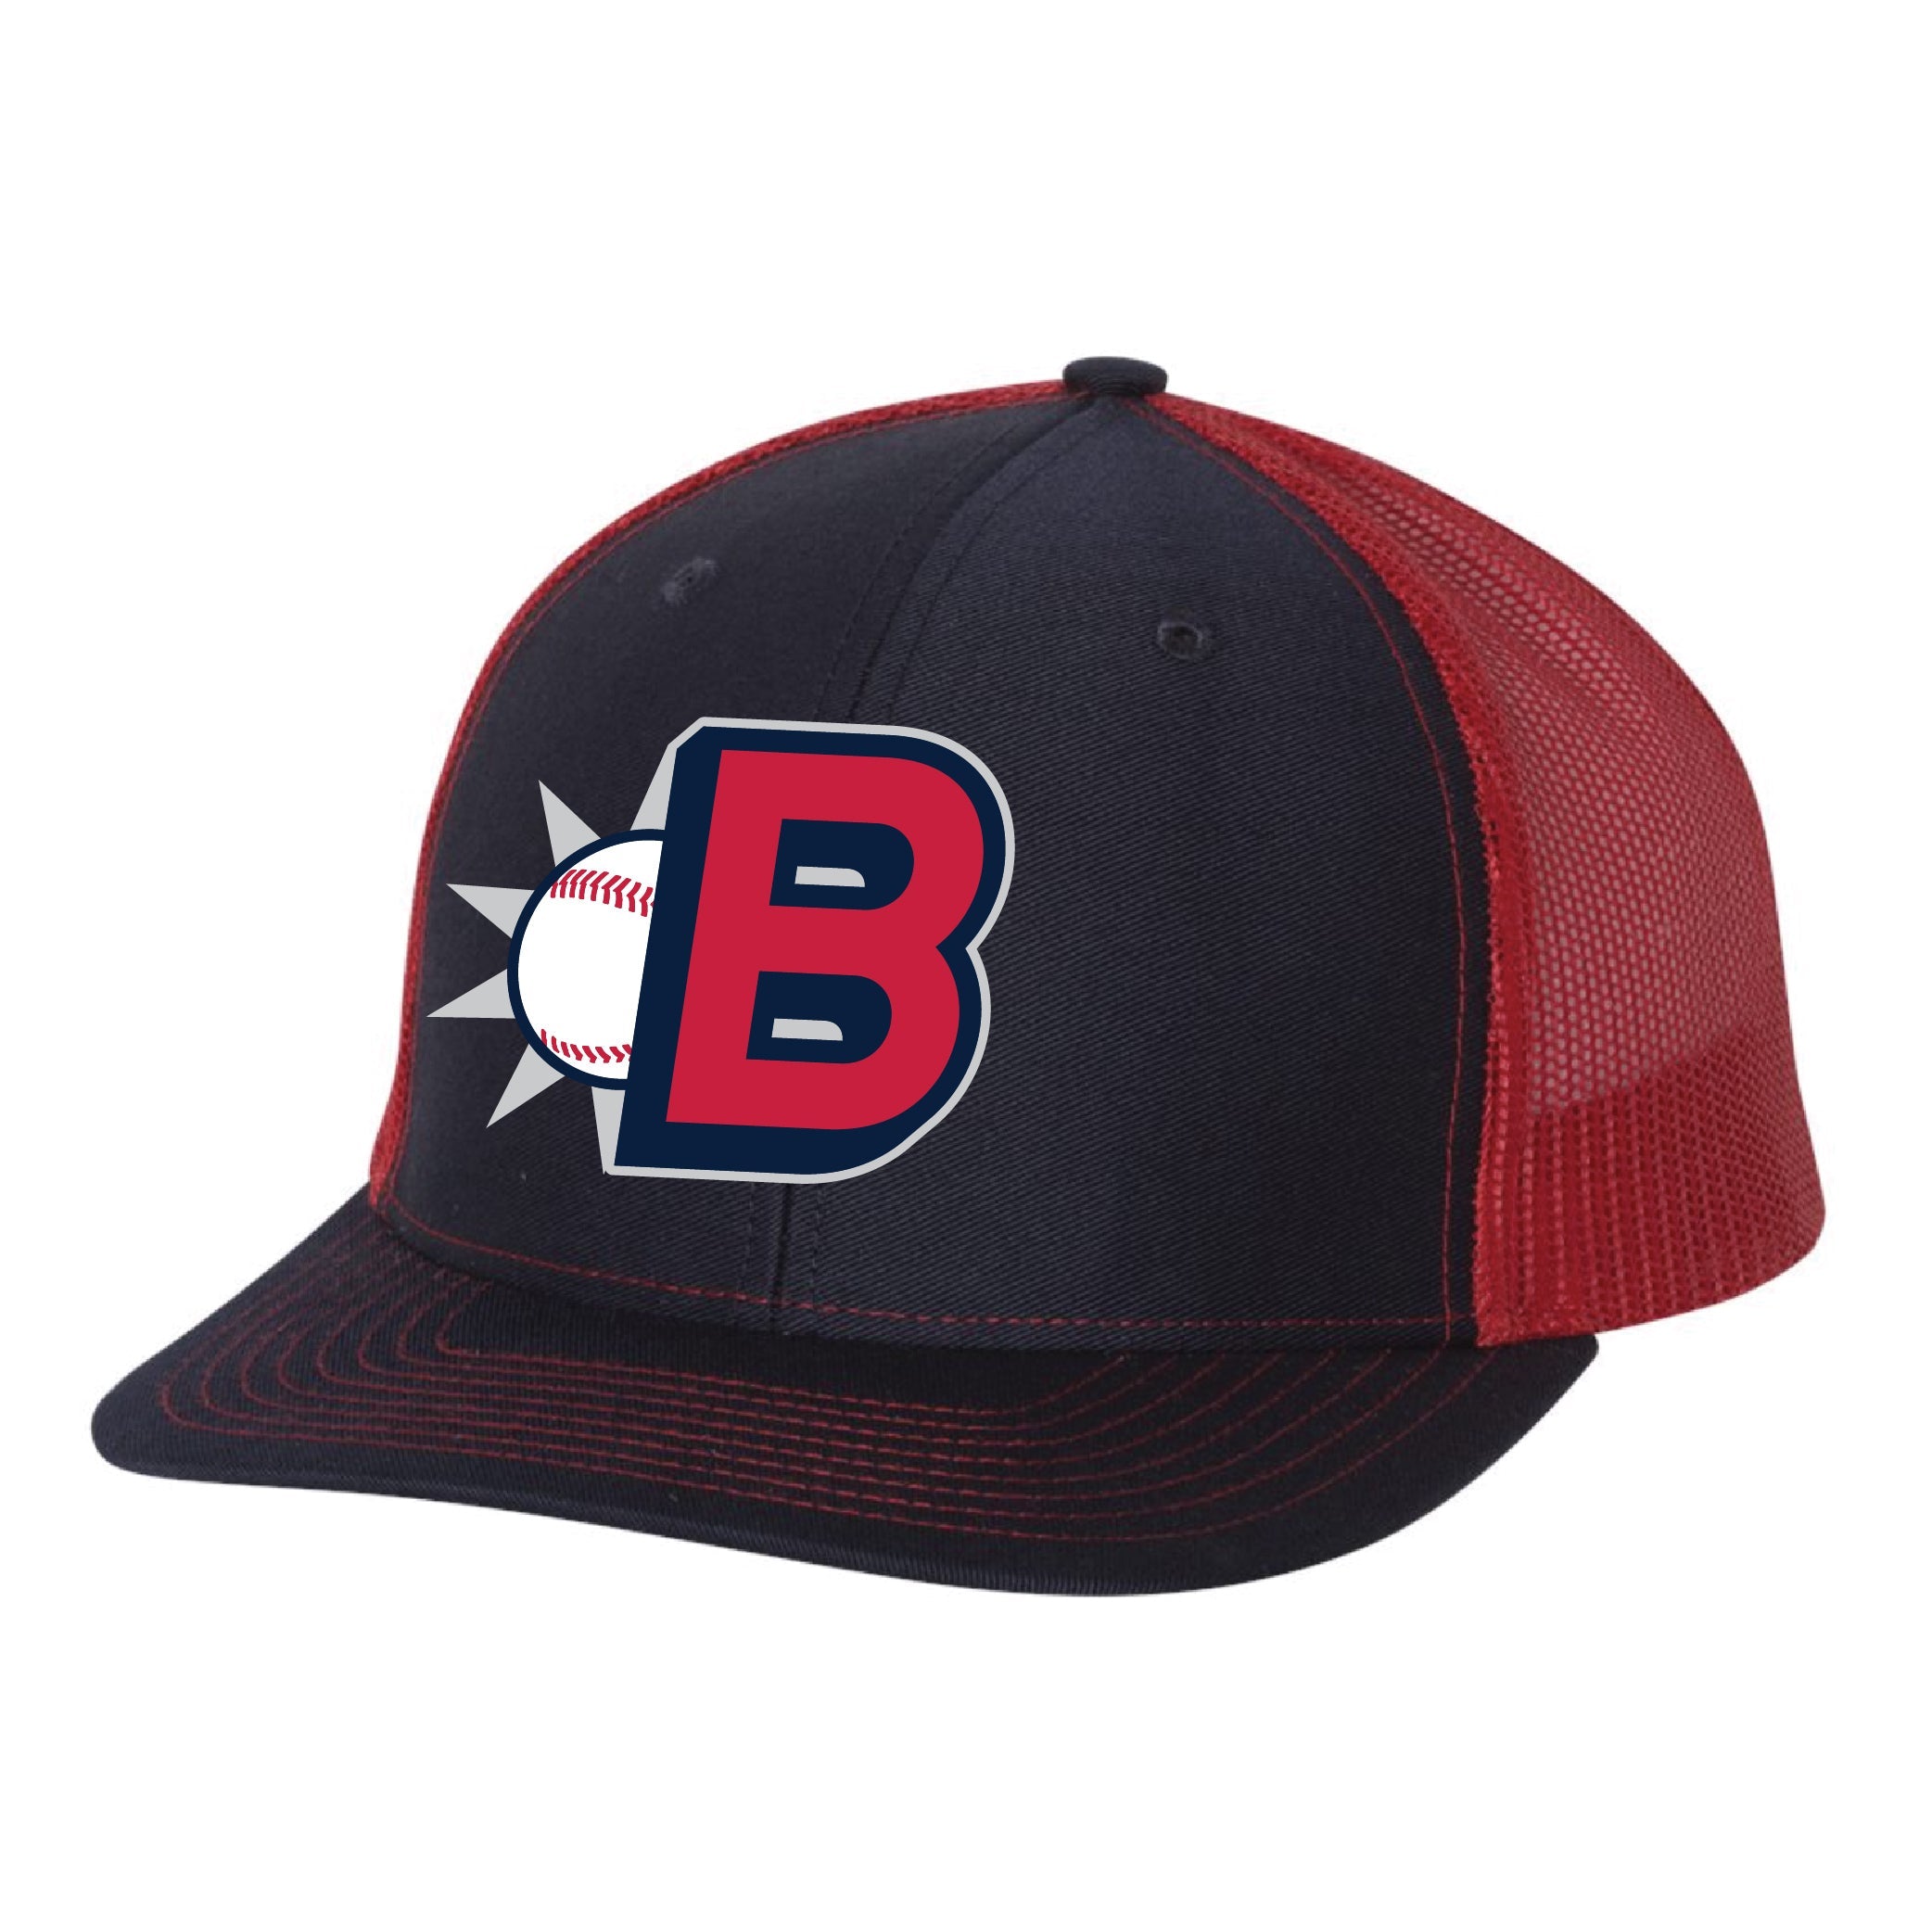 Bristol State Liners "B" Logo Red and Navy Mesh Back Adjustable Hat-0